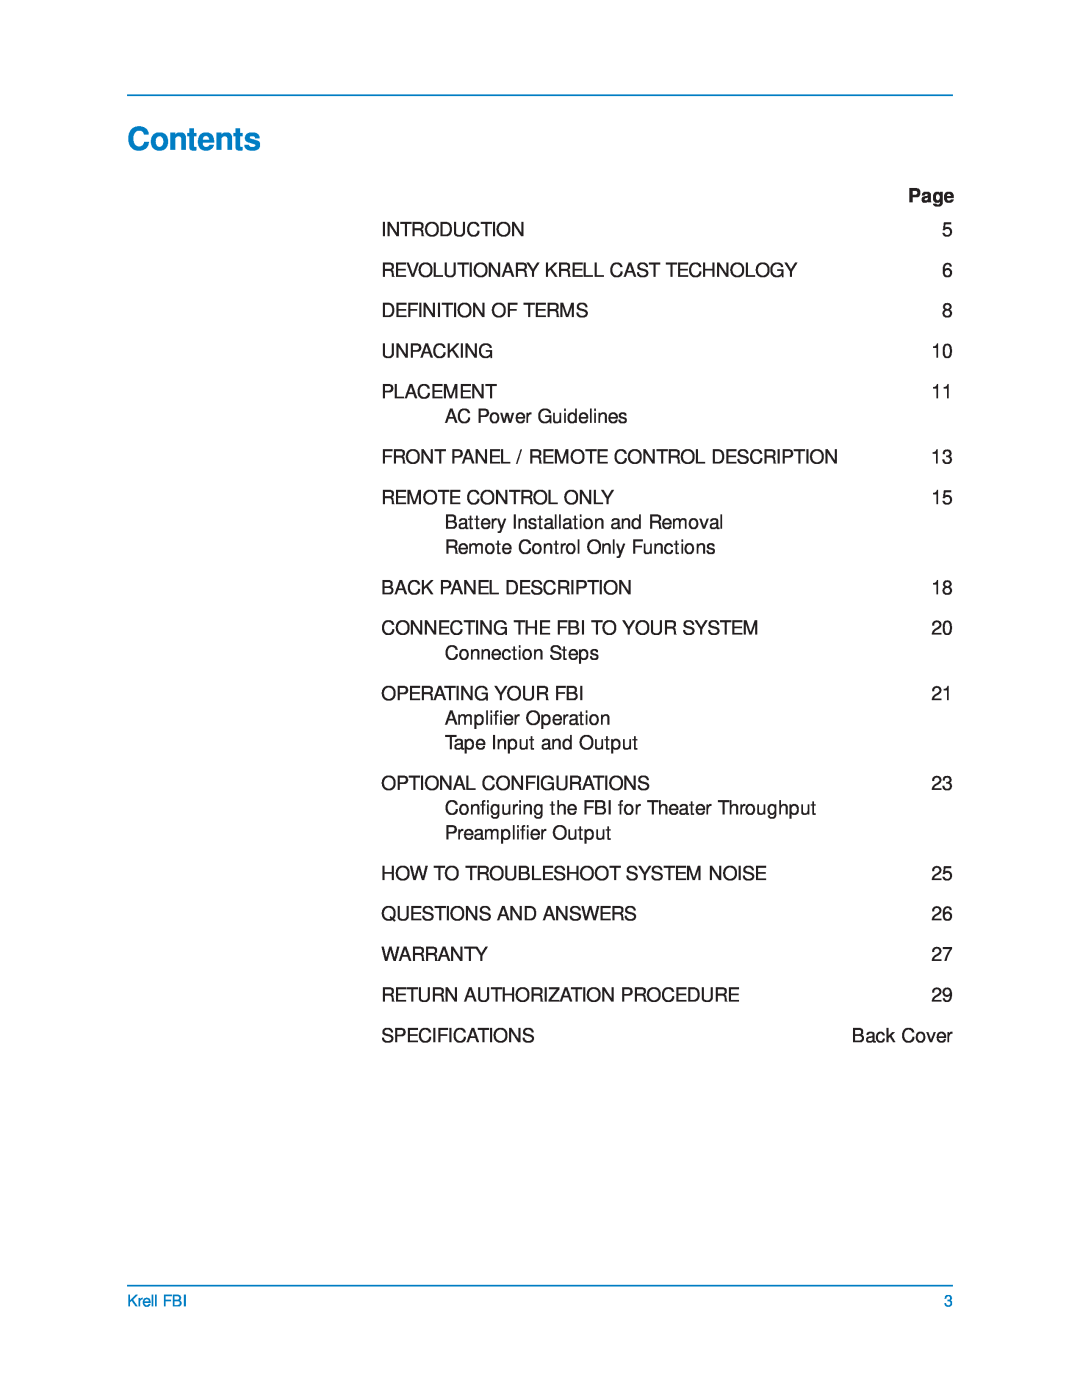 Krell Industries FBI manual Contents, Page 